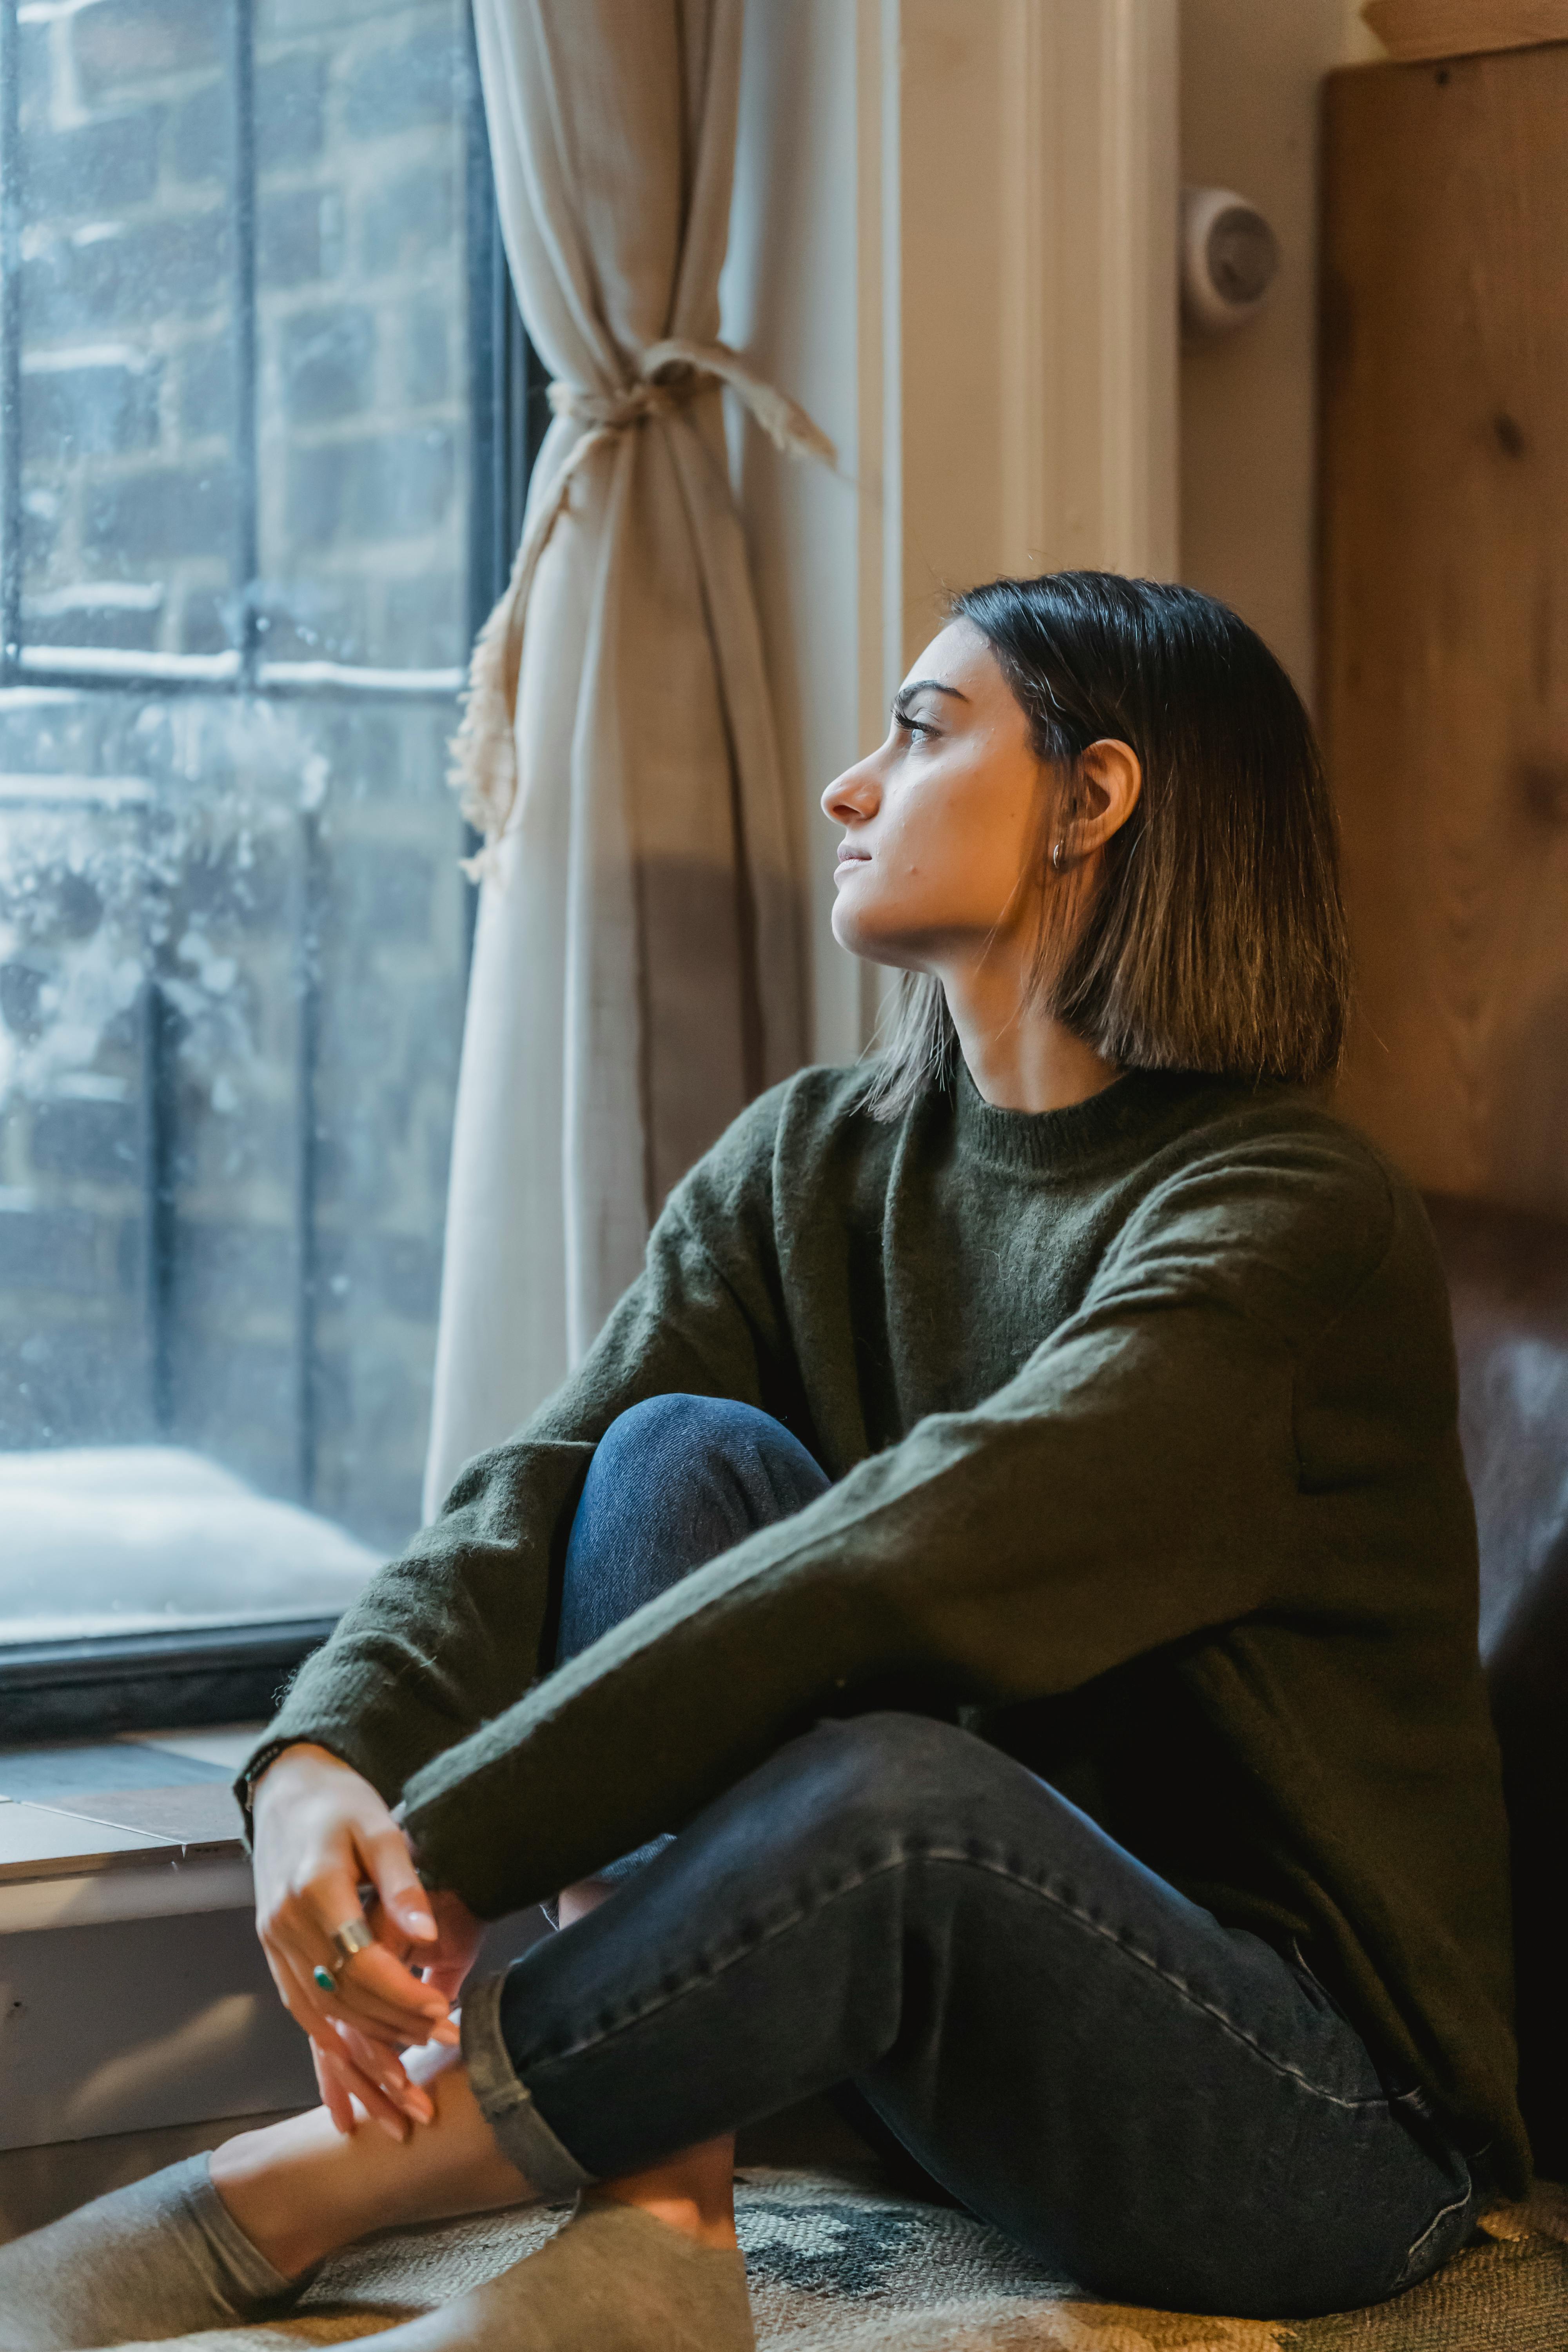 A woman sitting near the window with legs crossed | Source: Pexels